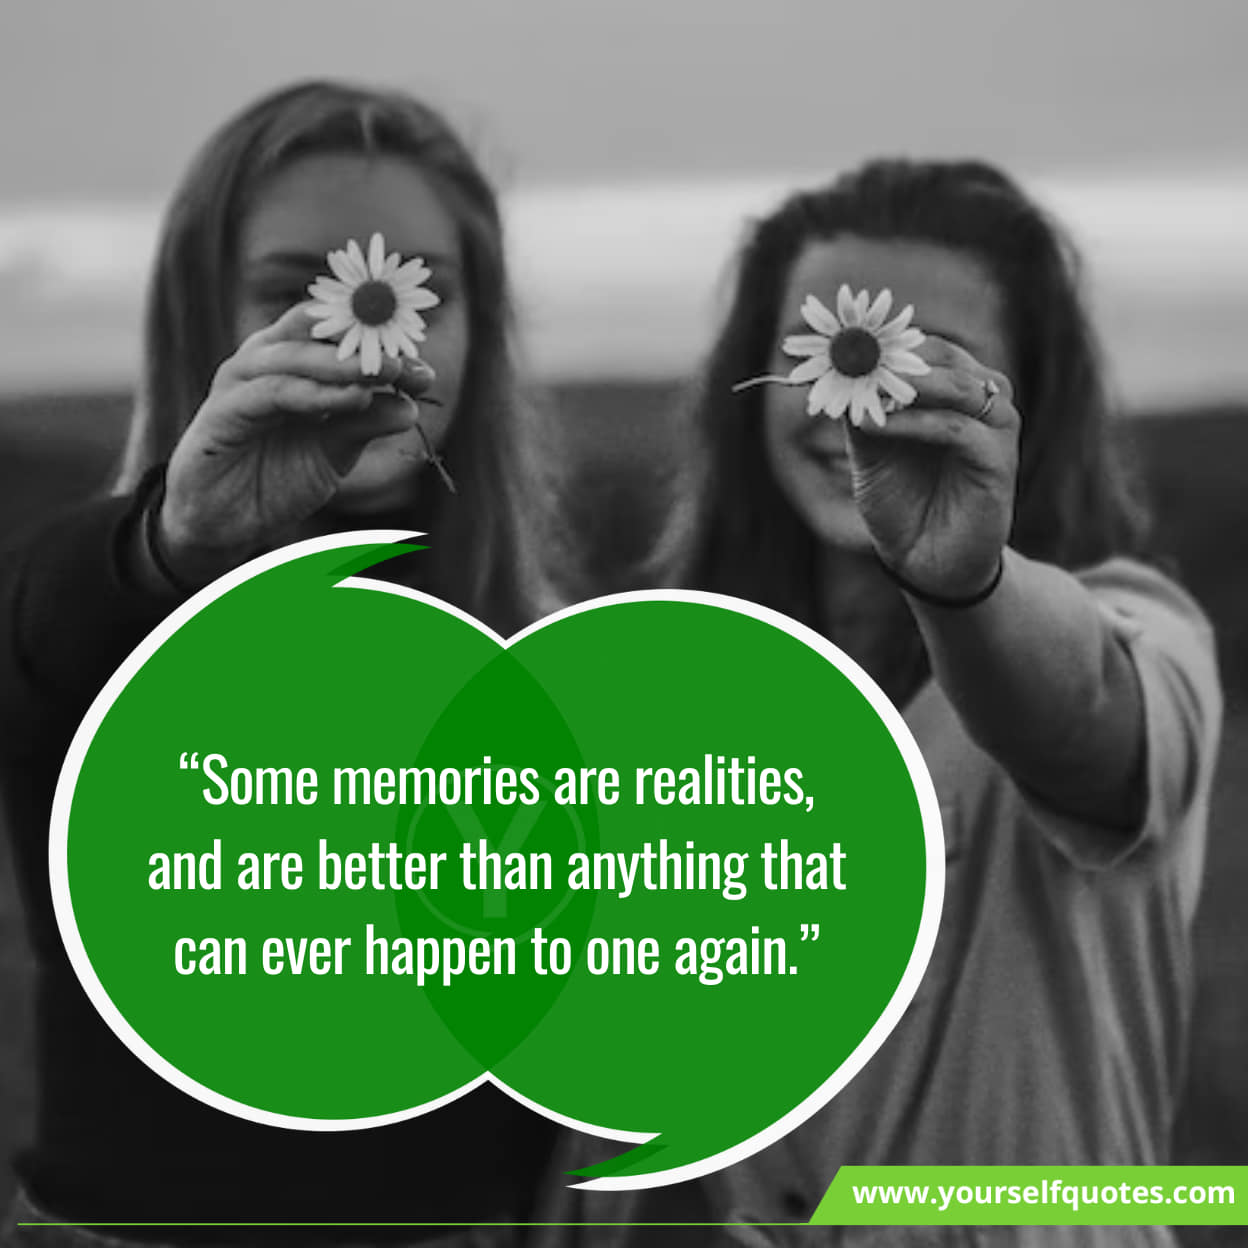 Inspirational Quotes On Memories